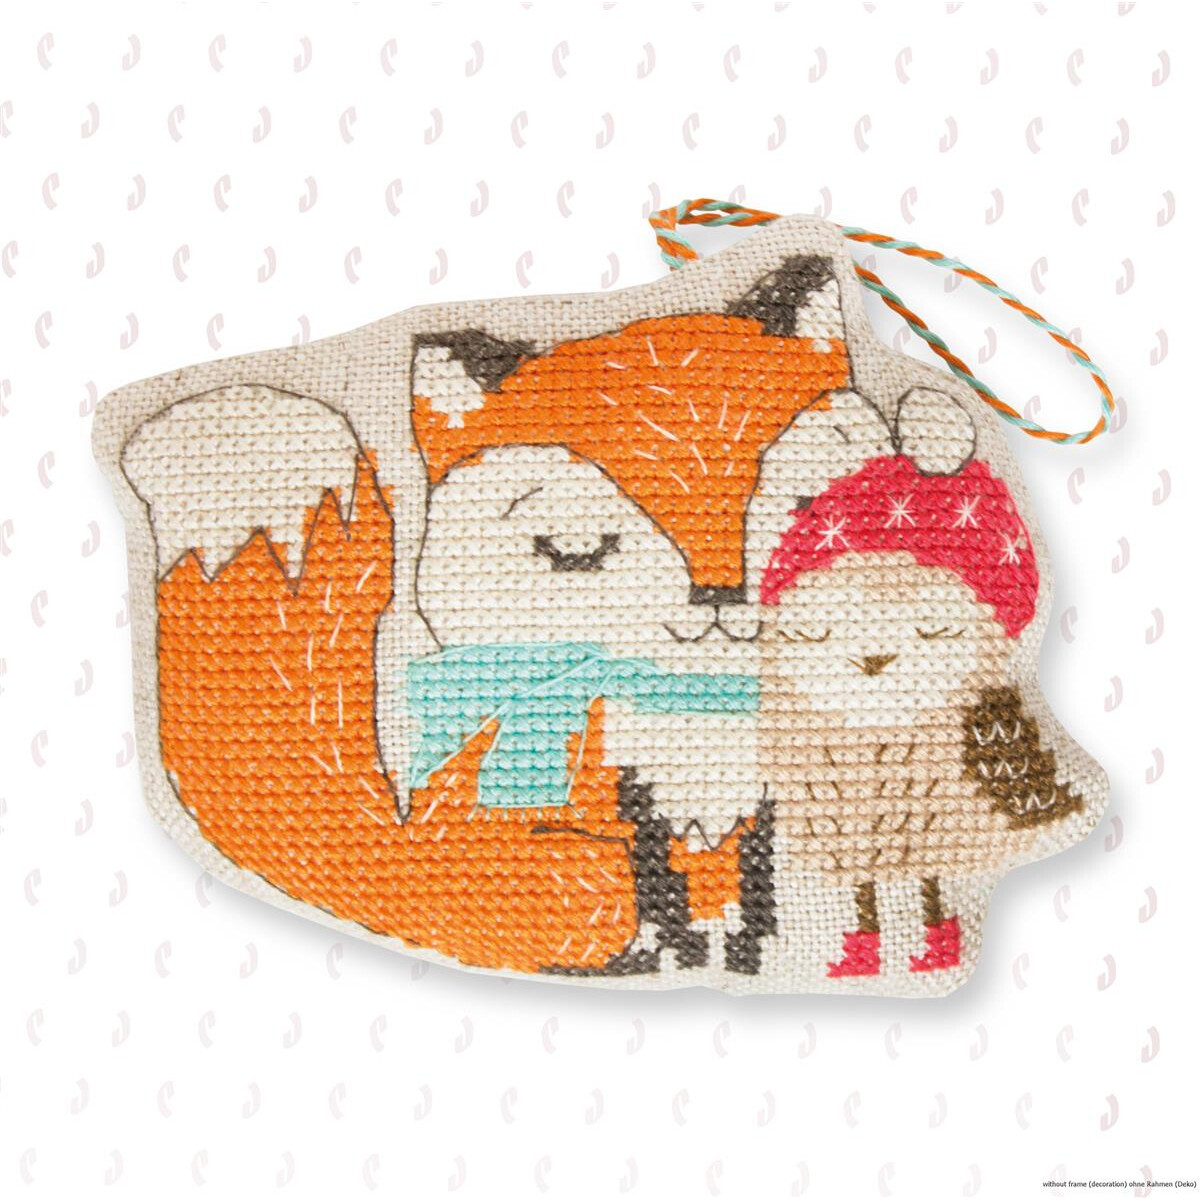 Luca-S counted Cross Stitch kit Toy "Fox and...